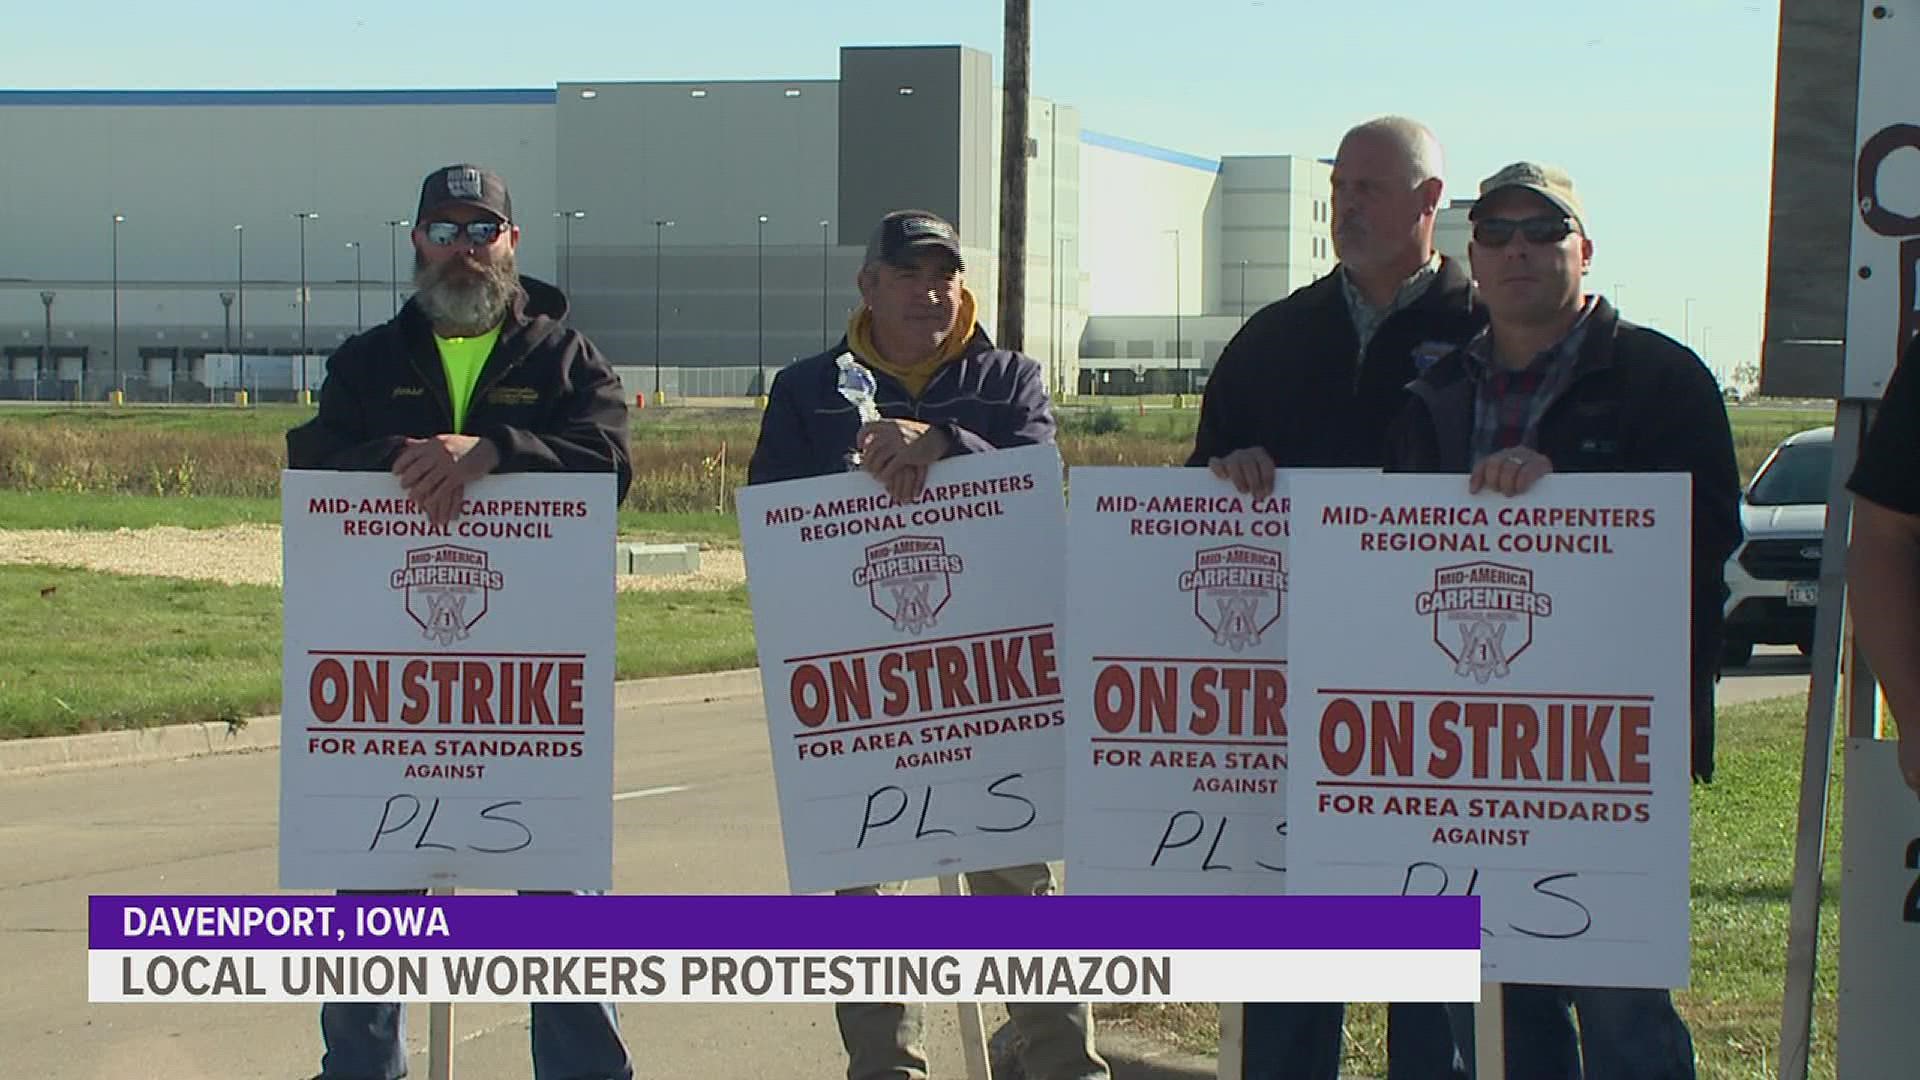 Union workers told News 8 that the protest will last until a solution is reached.